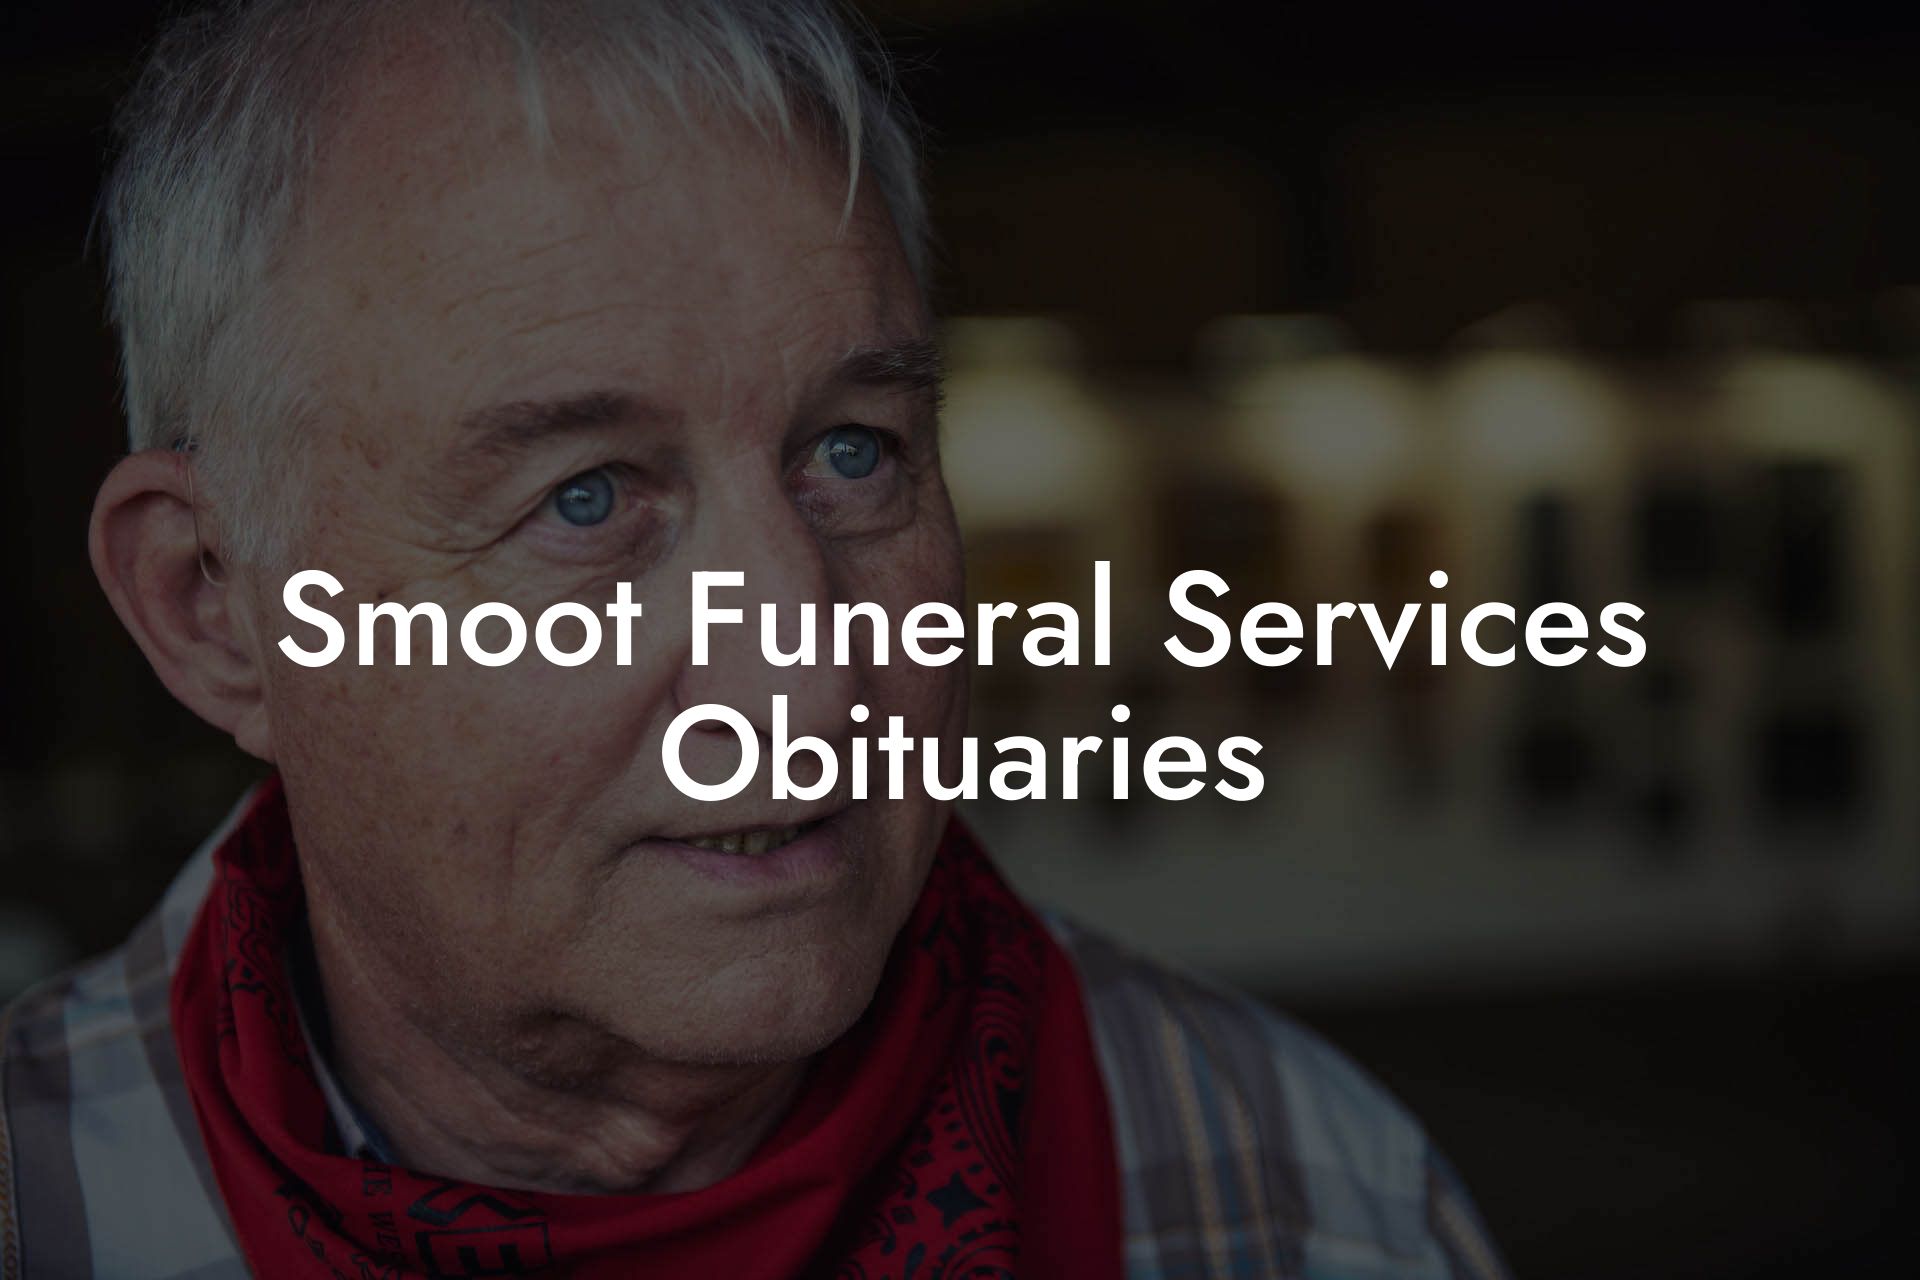 Smoot Funeral Services Obituaries